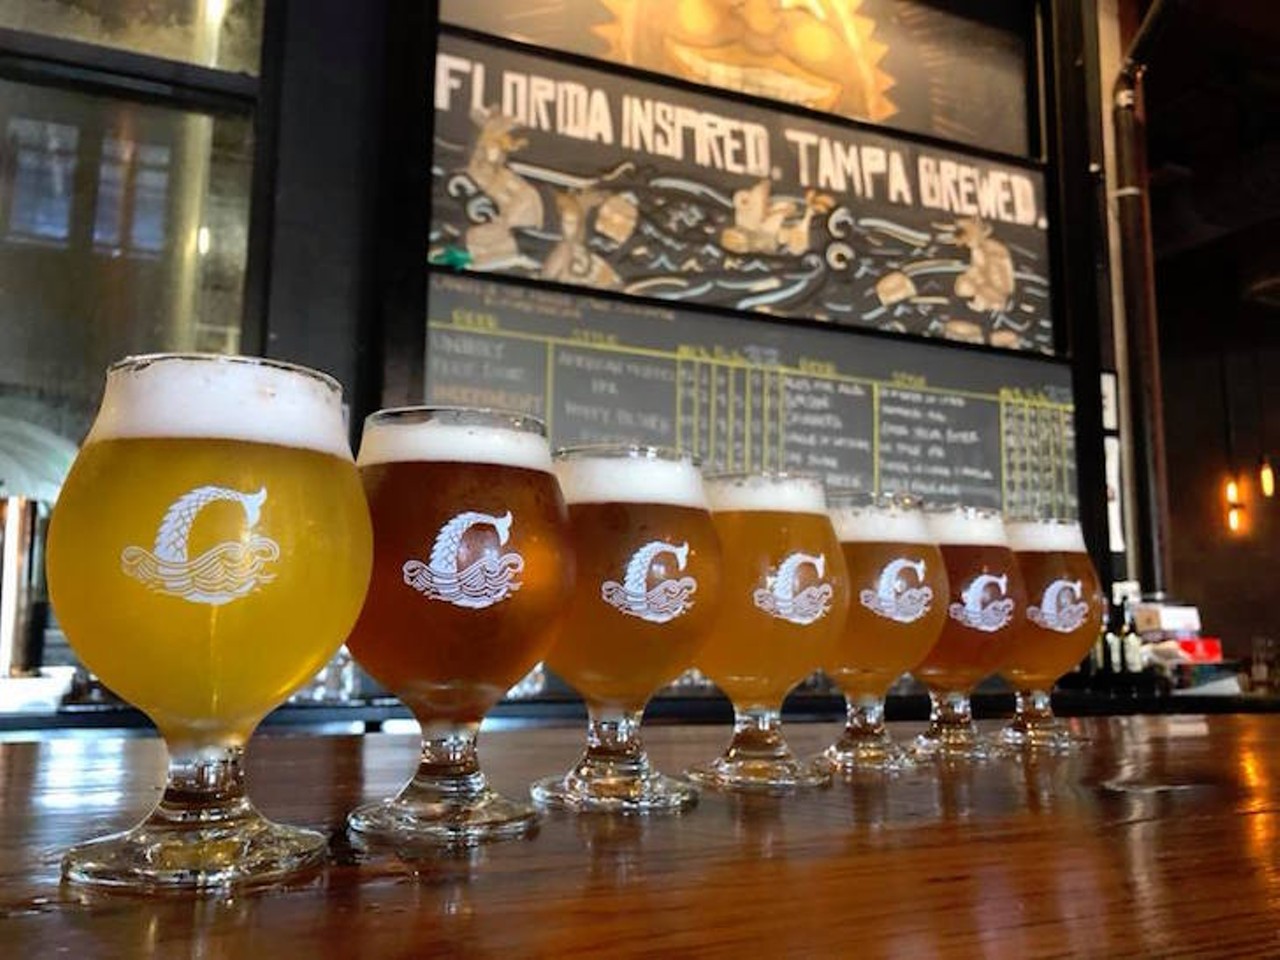 Coppertail Brewing Co.
2601 E. 2nd Ave., Tampa, 813-247-1500
Coppertail Brewing Co. and The Stein & Vein shared a tasting room since 2017, with Coppertail covering the bar and Stein & Vein at the Kitchen&#146;s helm. Now, Coppertail has the reins all to themselves, bidding adieu to their partners back in June, and producing a food identity all their own. The new menu features items like buffalo cauliflower, tikka masala flatbread, chicken wings, steak sandwich, vegan sausage sandwich and charcuterie, to name a few.
Photo via Coppertail Brewing Co/Facebook